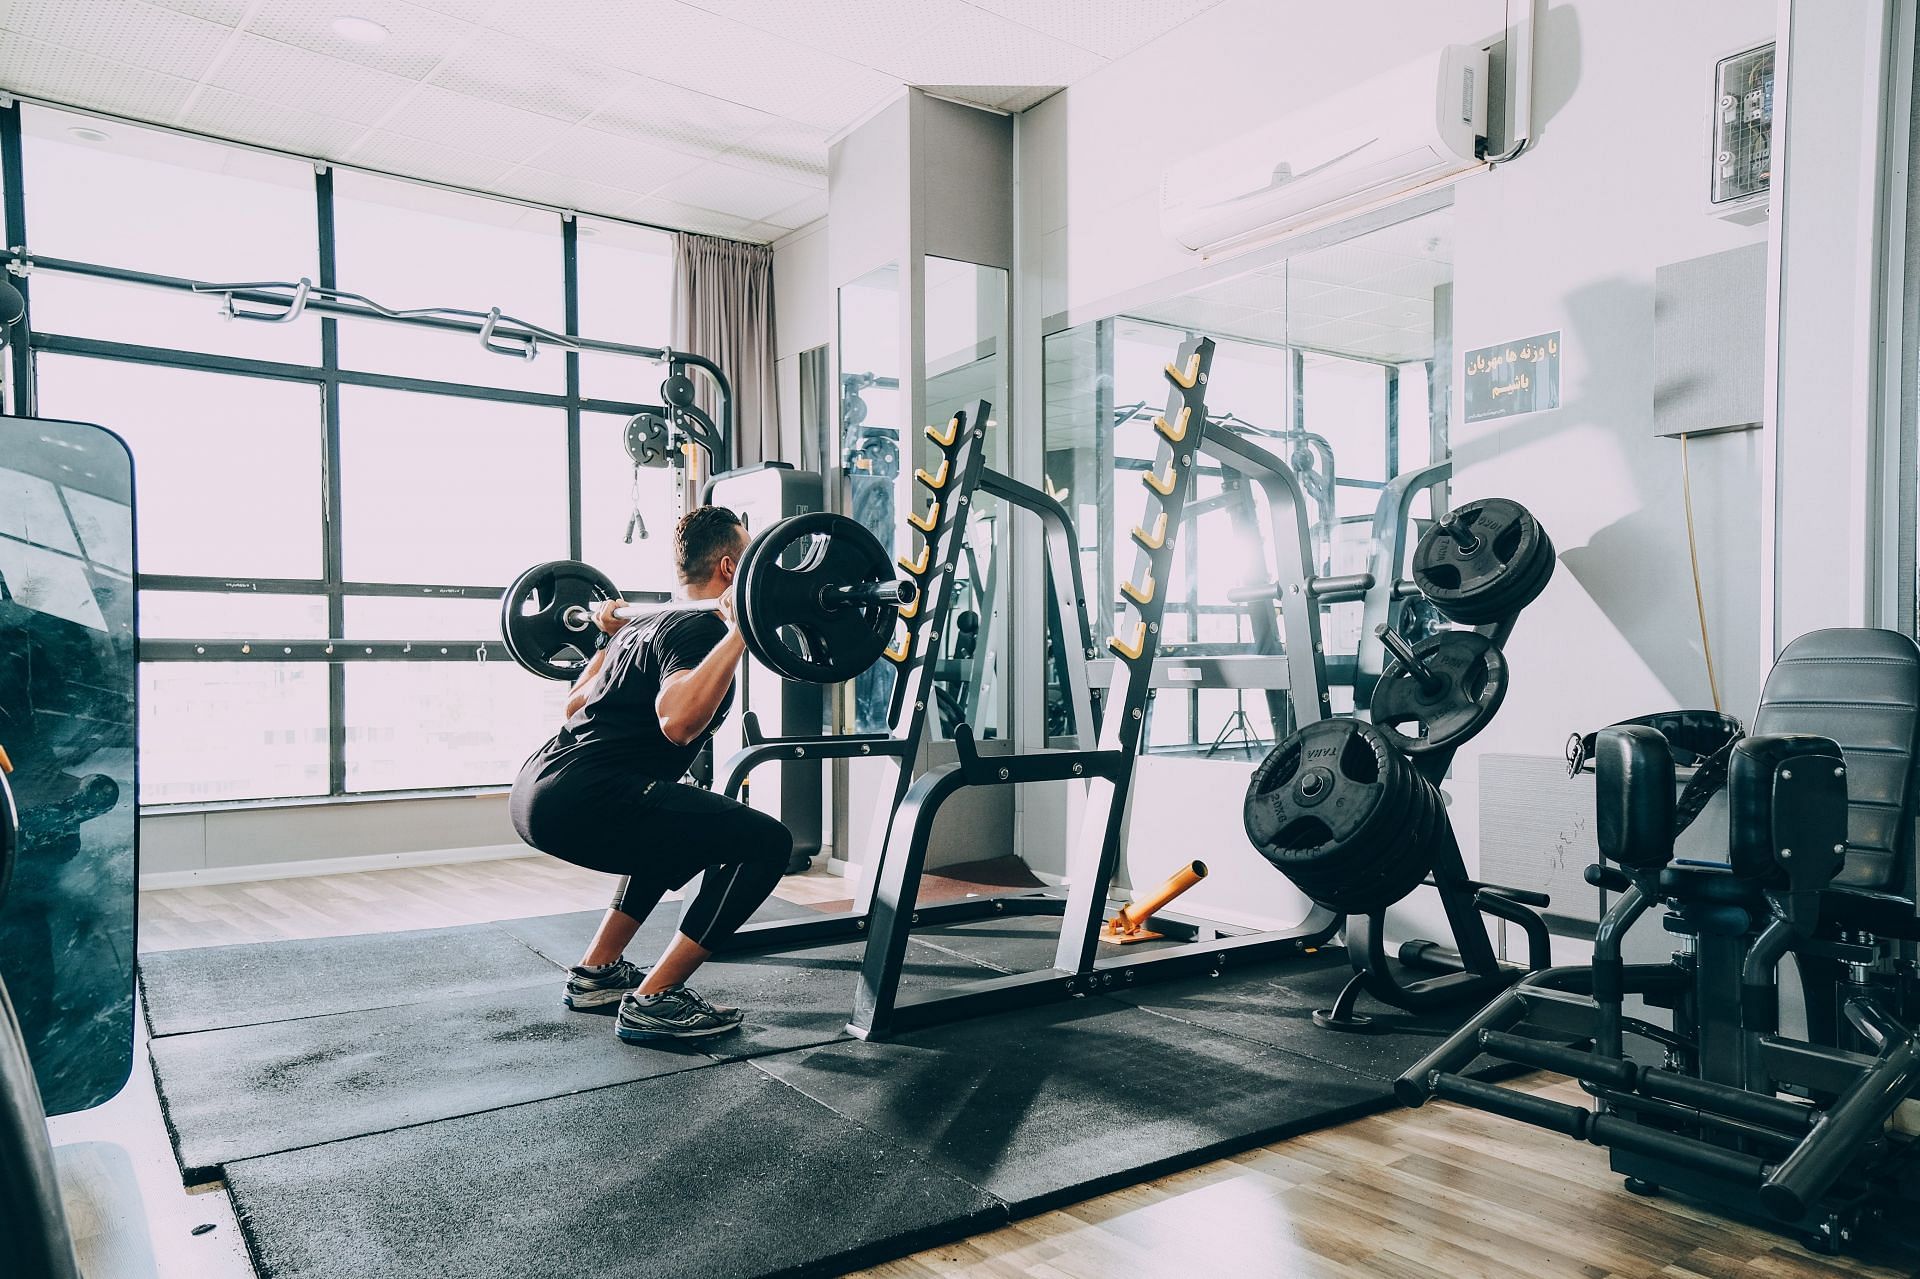 Workout for legs and glutes must be planned (Photo by Sam Moghadam Khamseh on Unsplash)